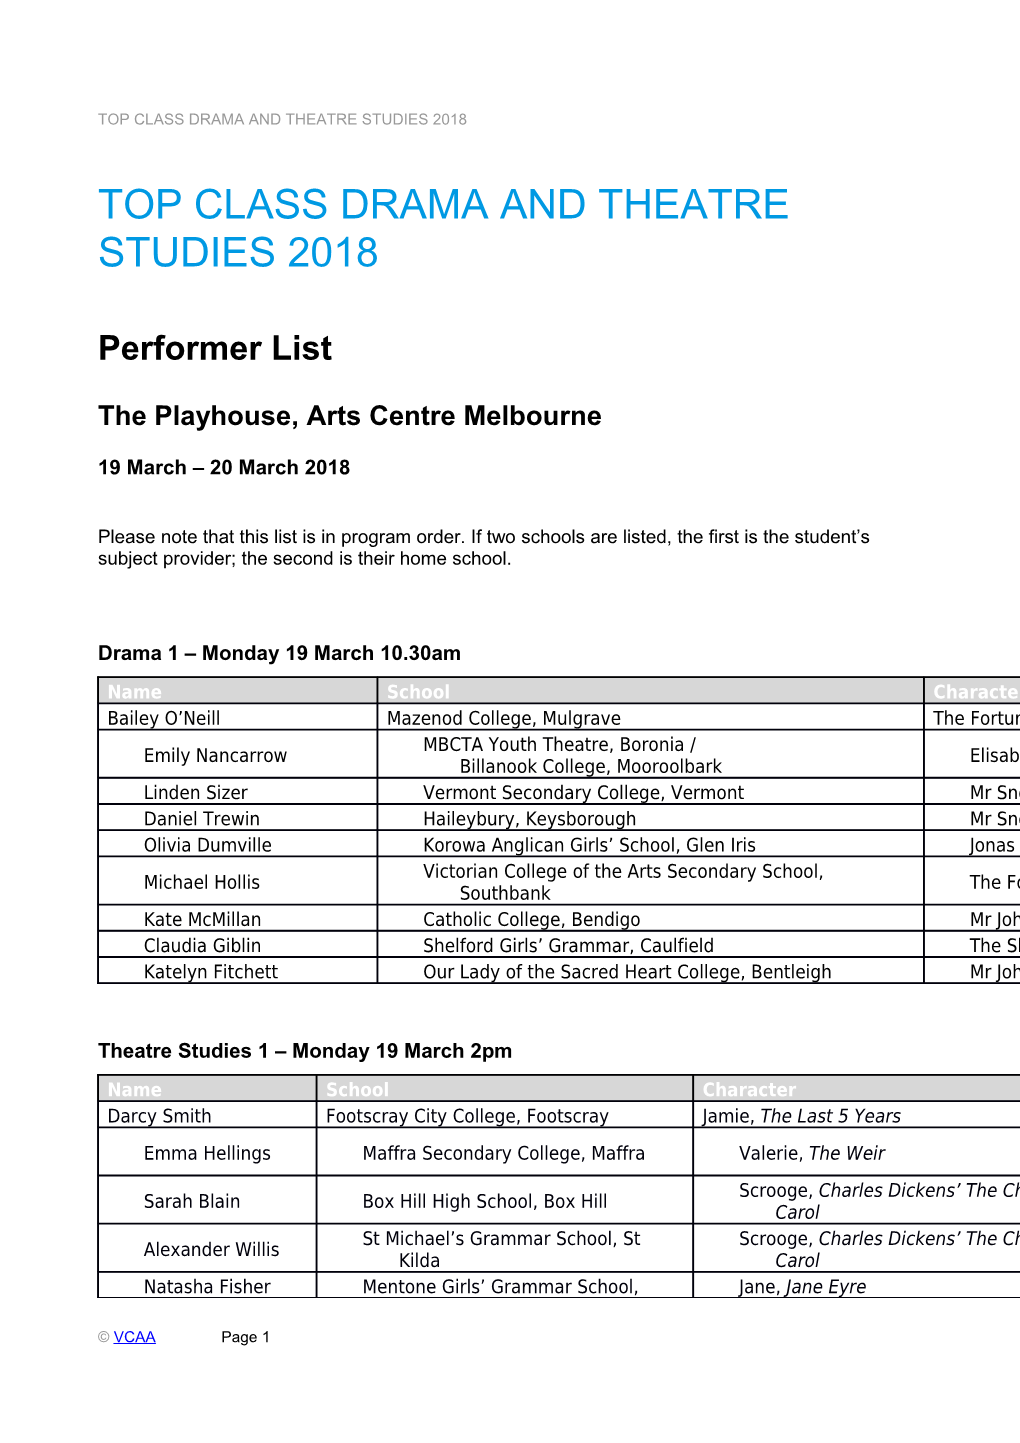 Top Class Drama and Theatre Studies 2018